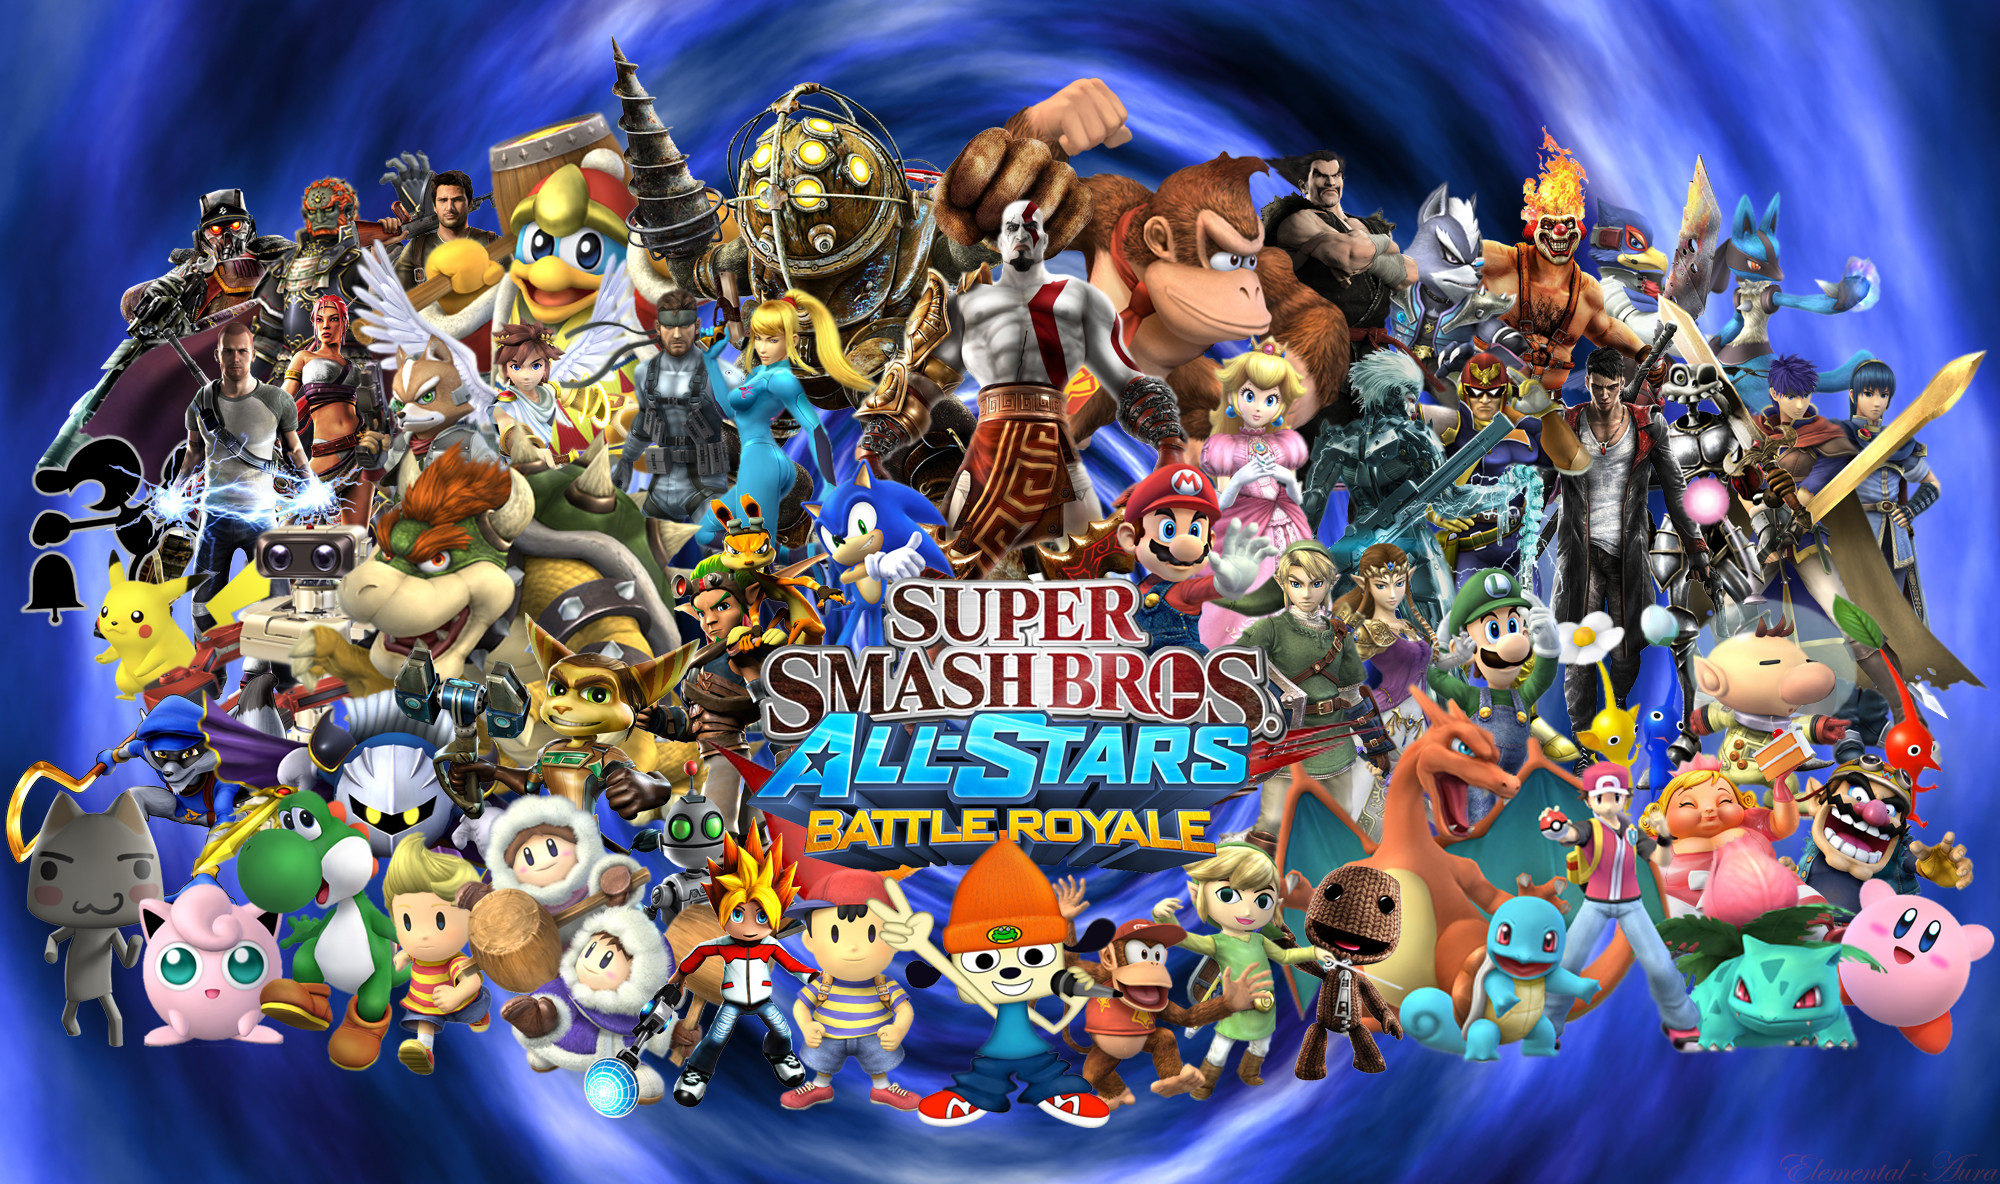 2000x1184 PlayStation All-Stars Battle Royale images Super Smash Bros All-Stars  Battle Royal! HD wallpaper and background photos